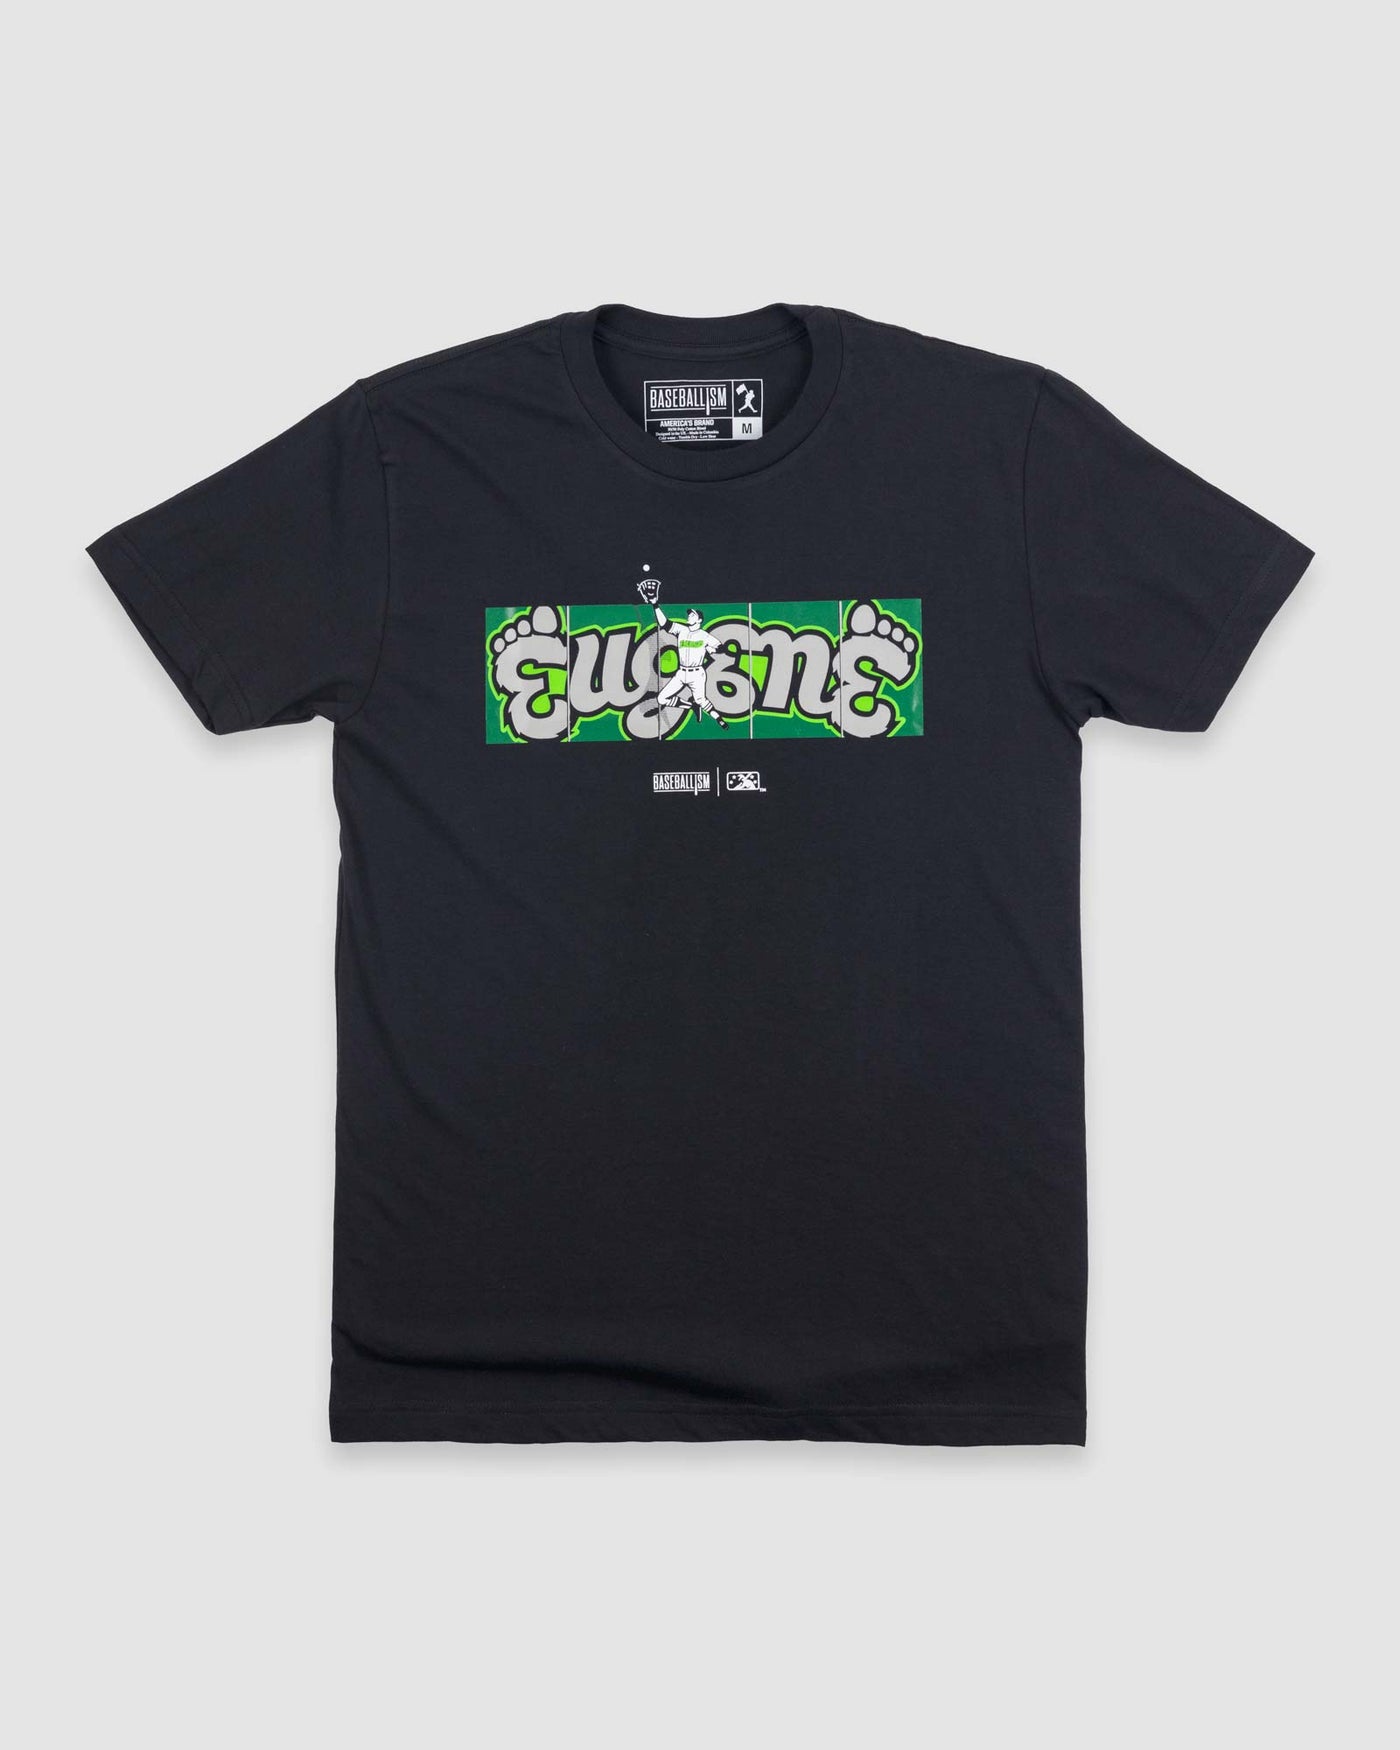 Outfield Fence Tee - Eugene Emeralds